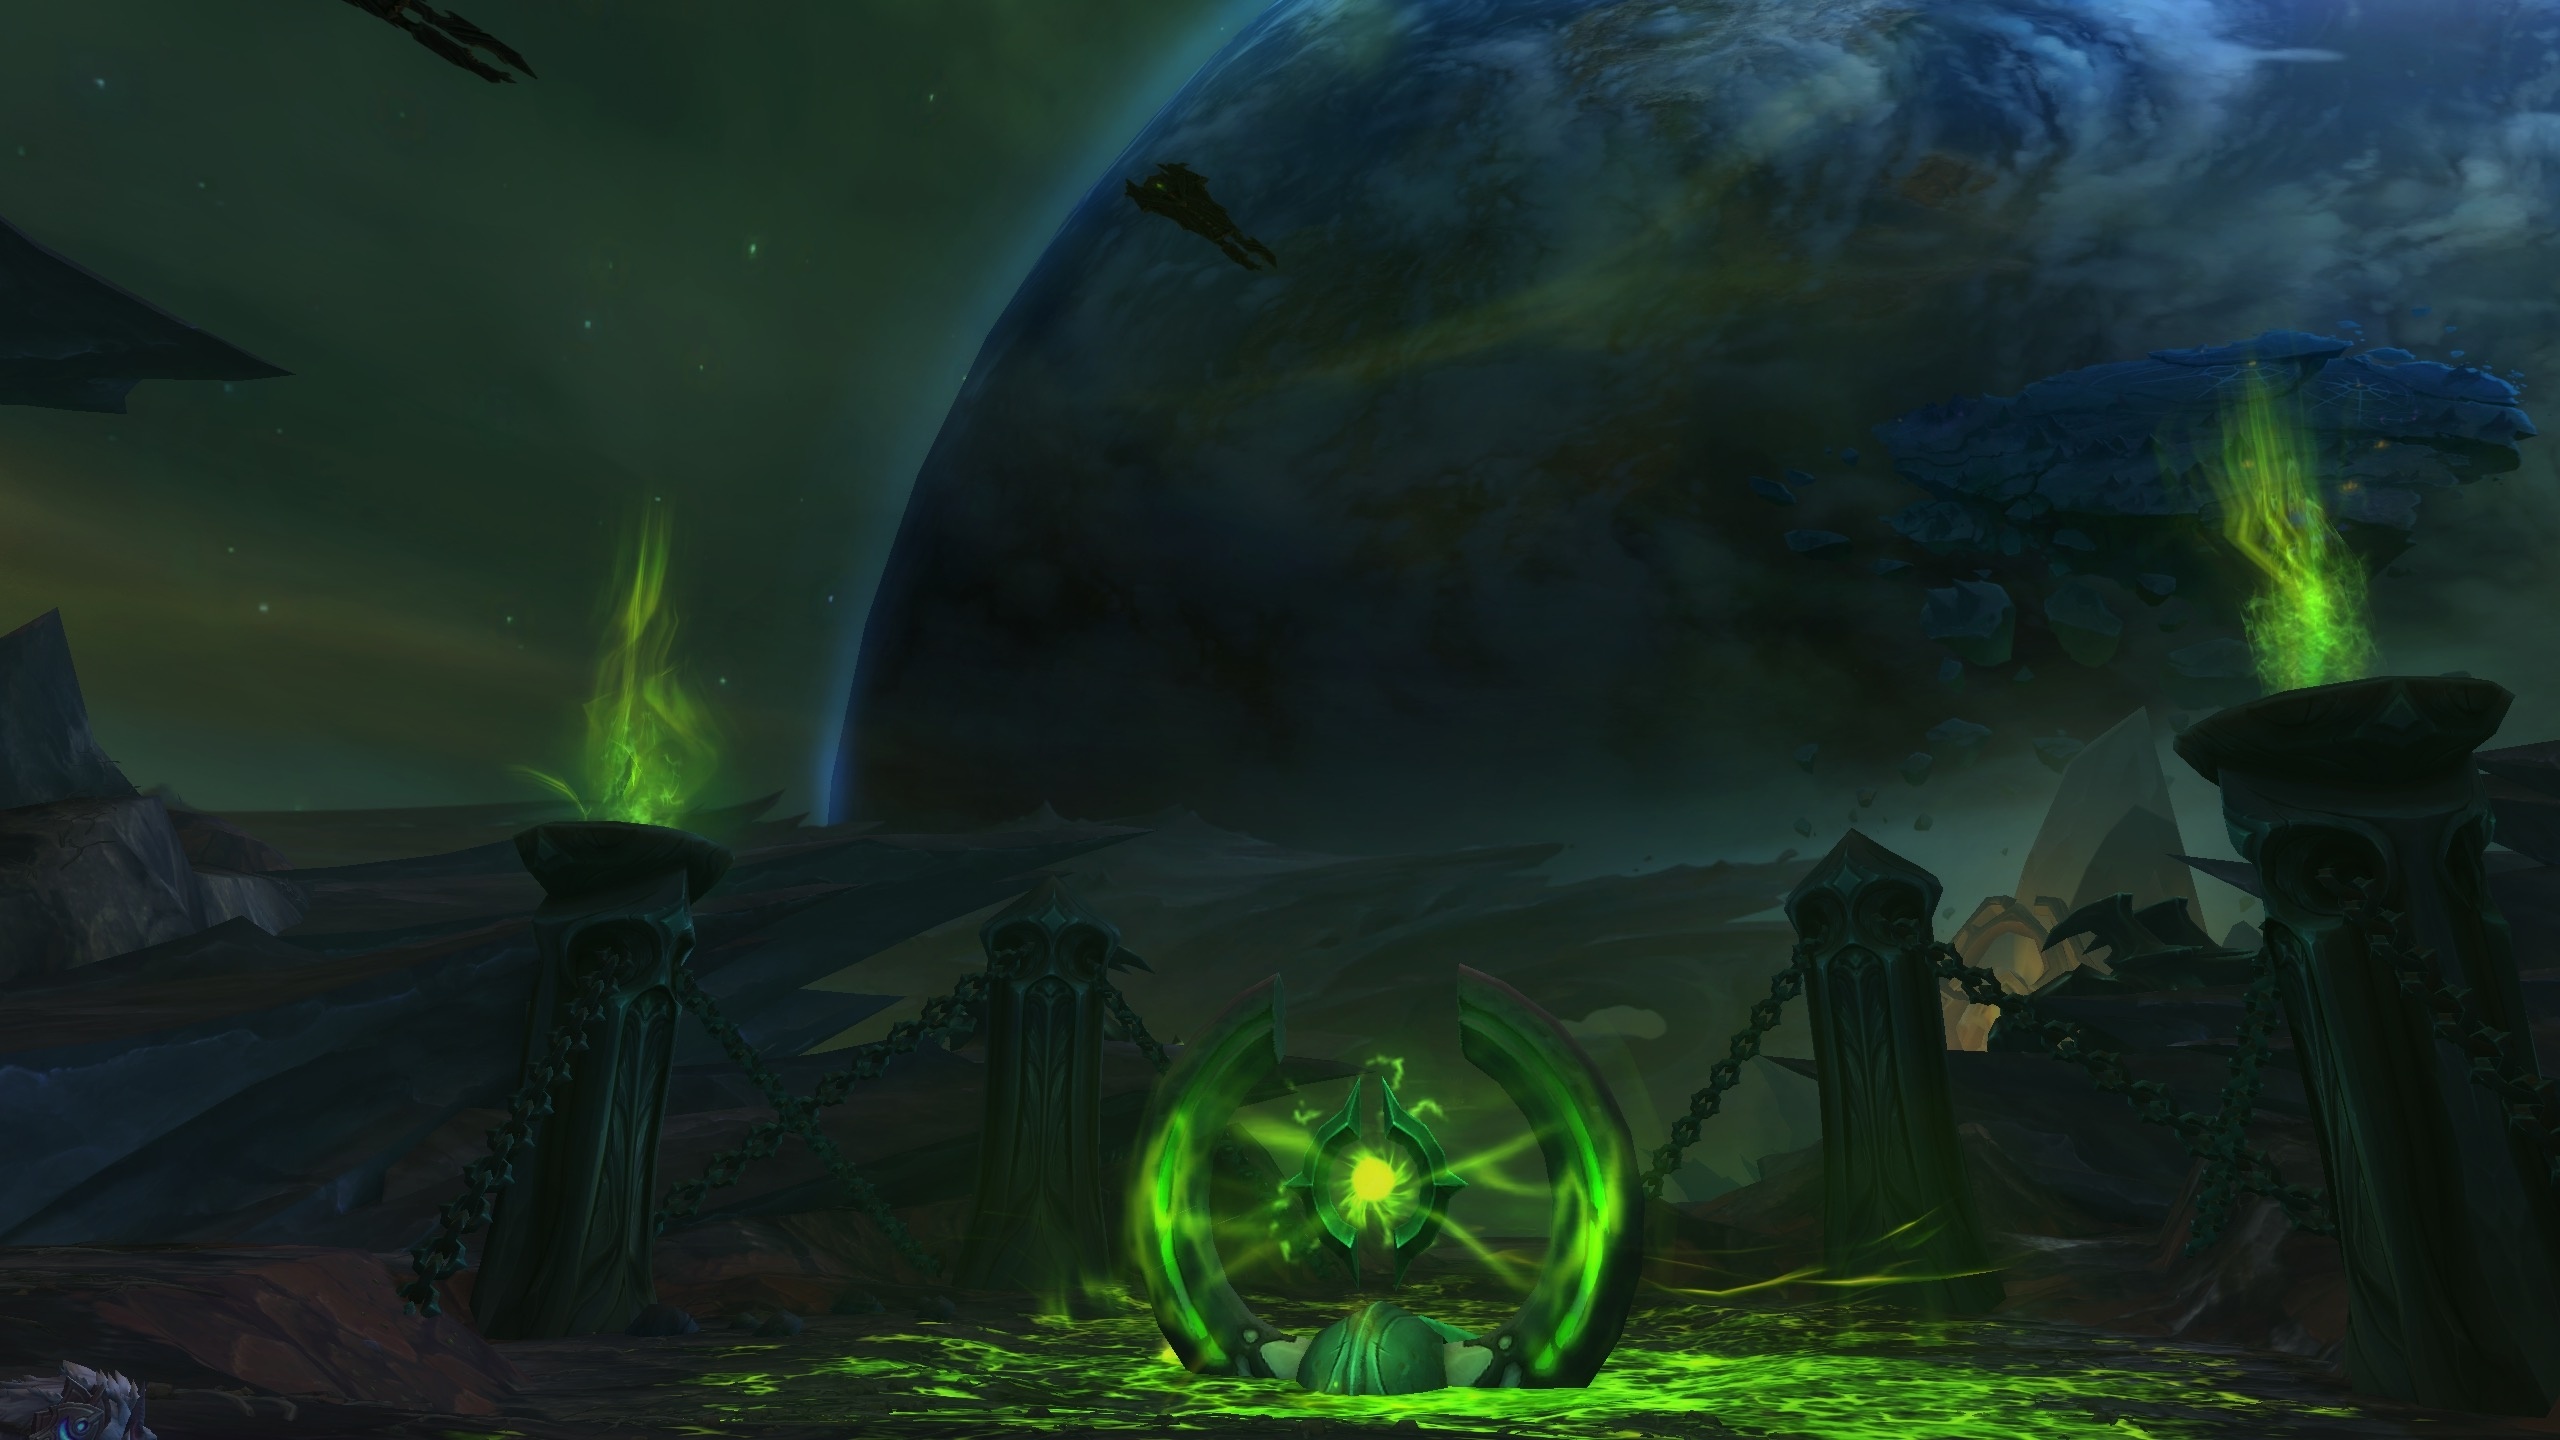 download wowhead 9.2 for free